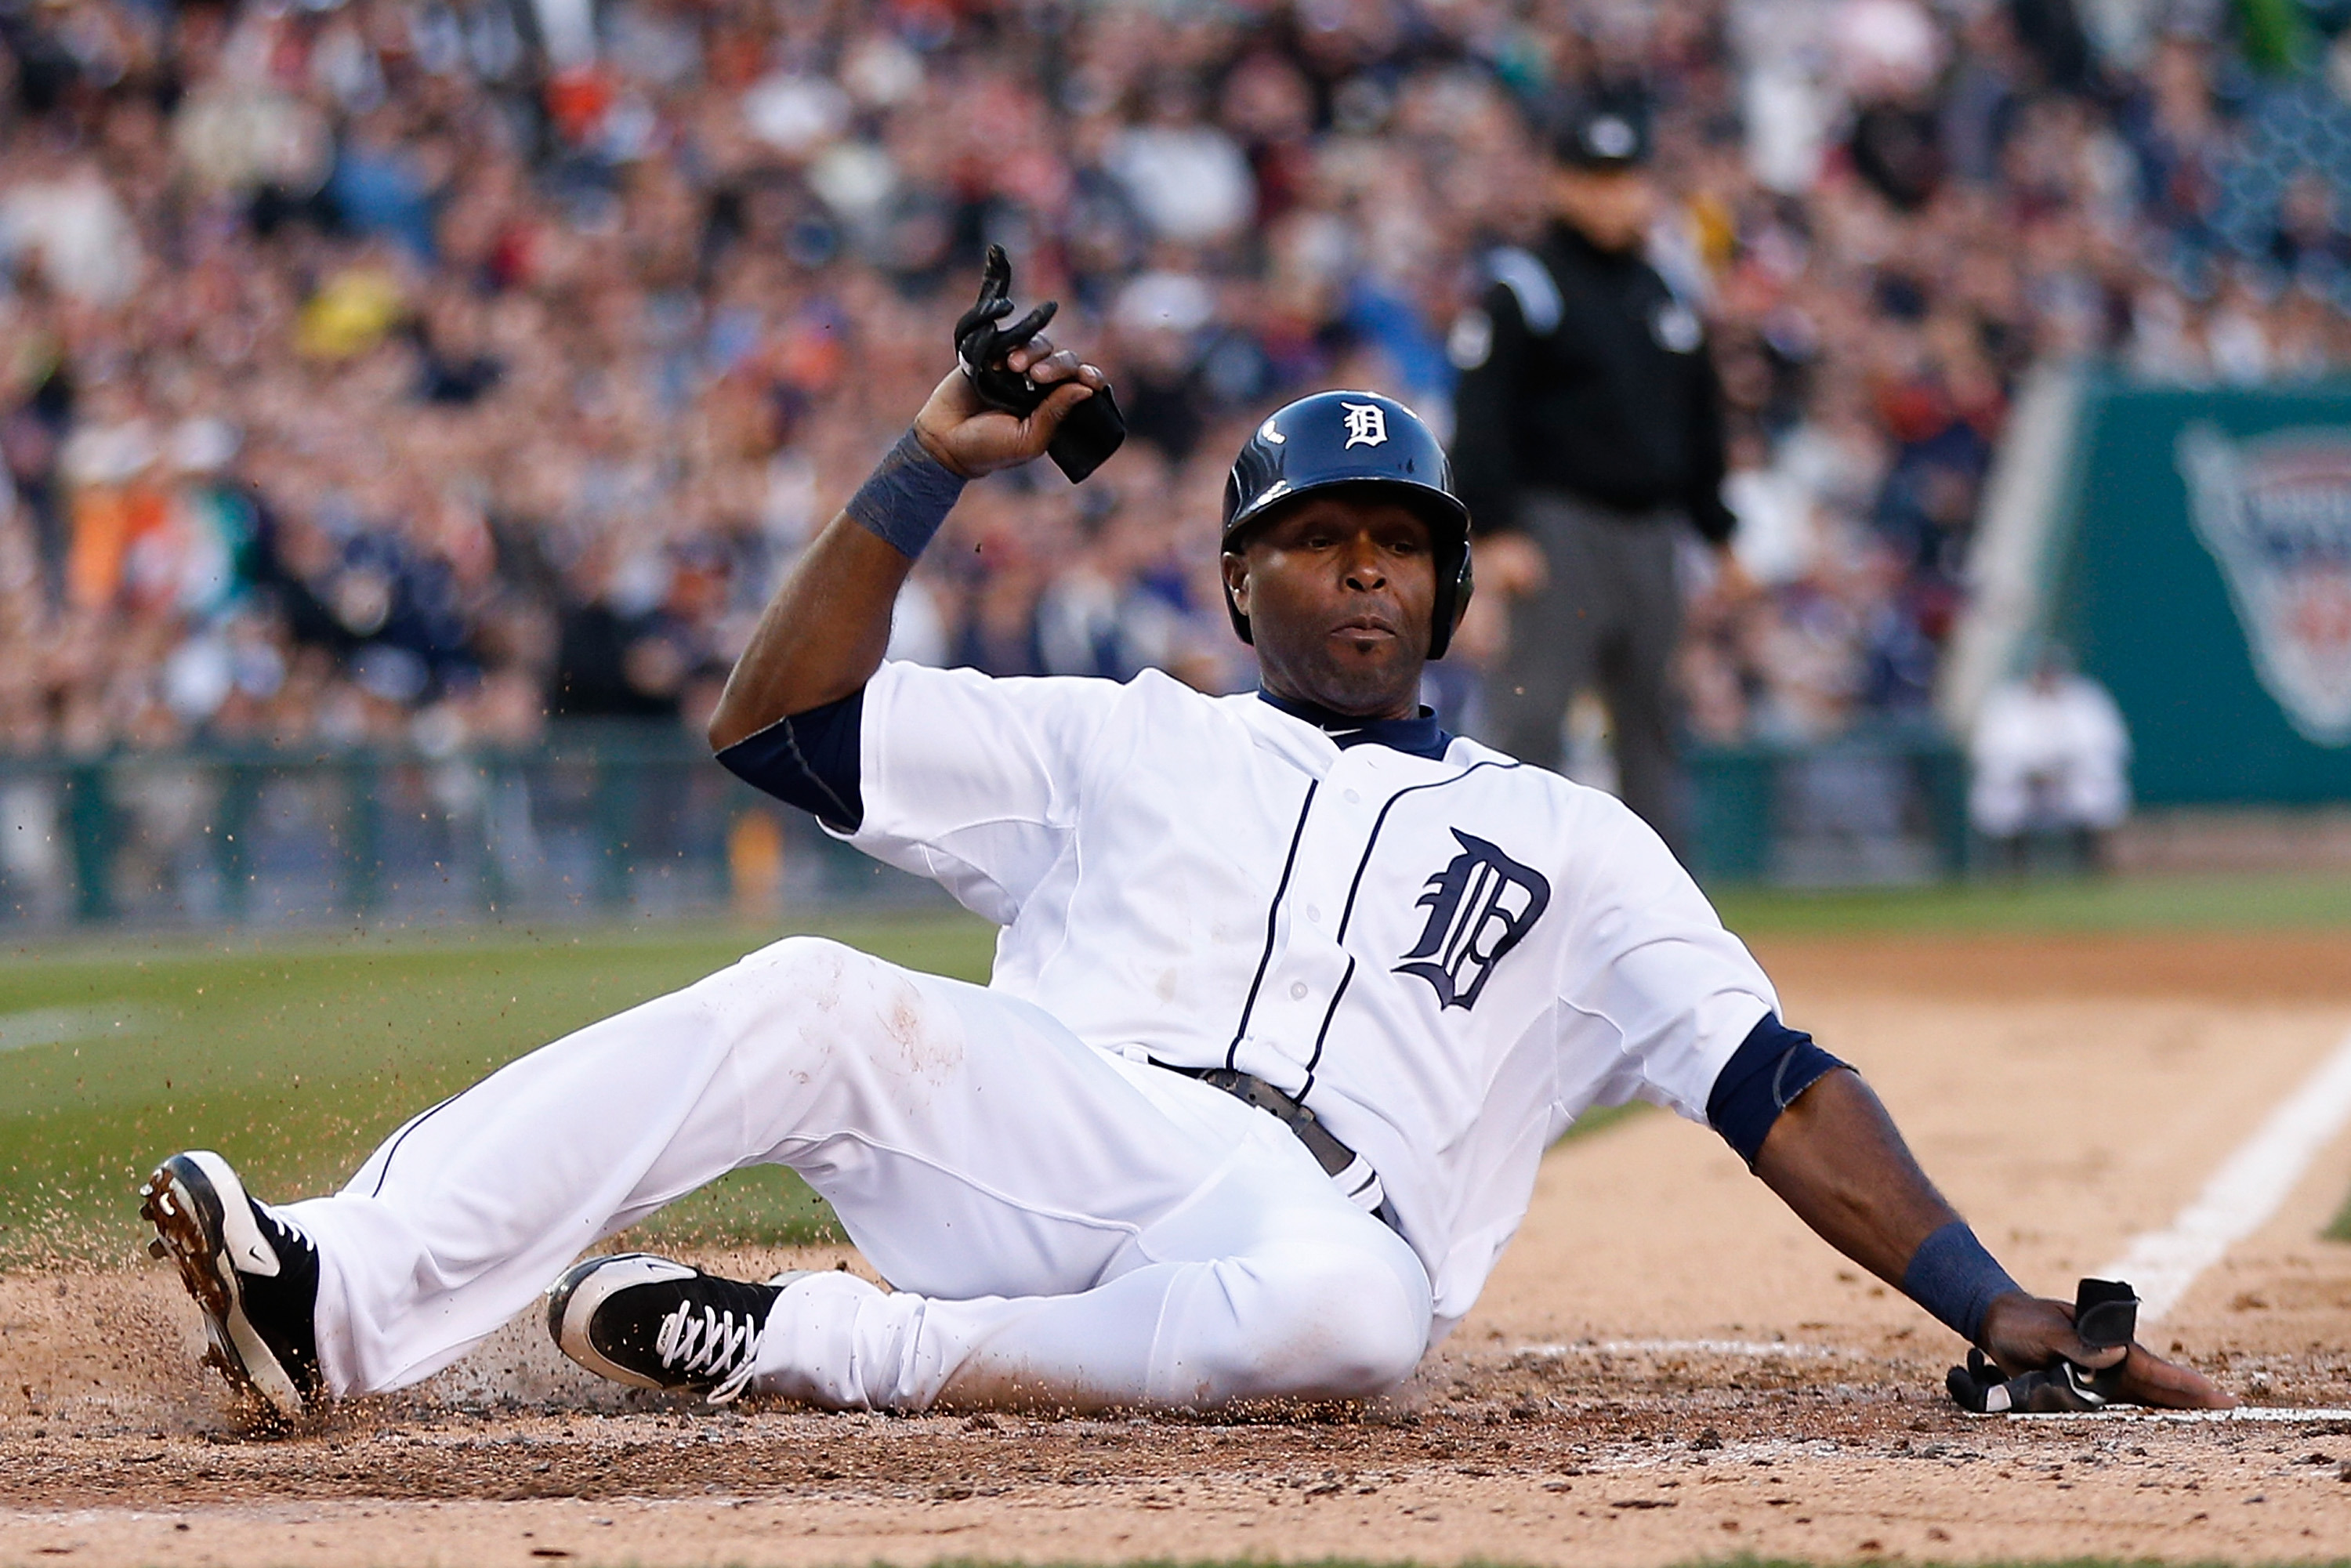 Tigers' Torii Hunter mulling retirement after abrupt end to playoff run –  Macomb Daily